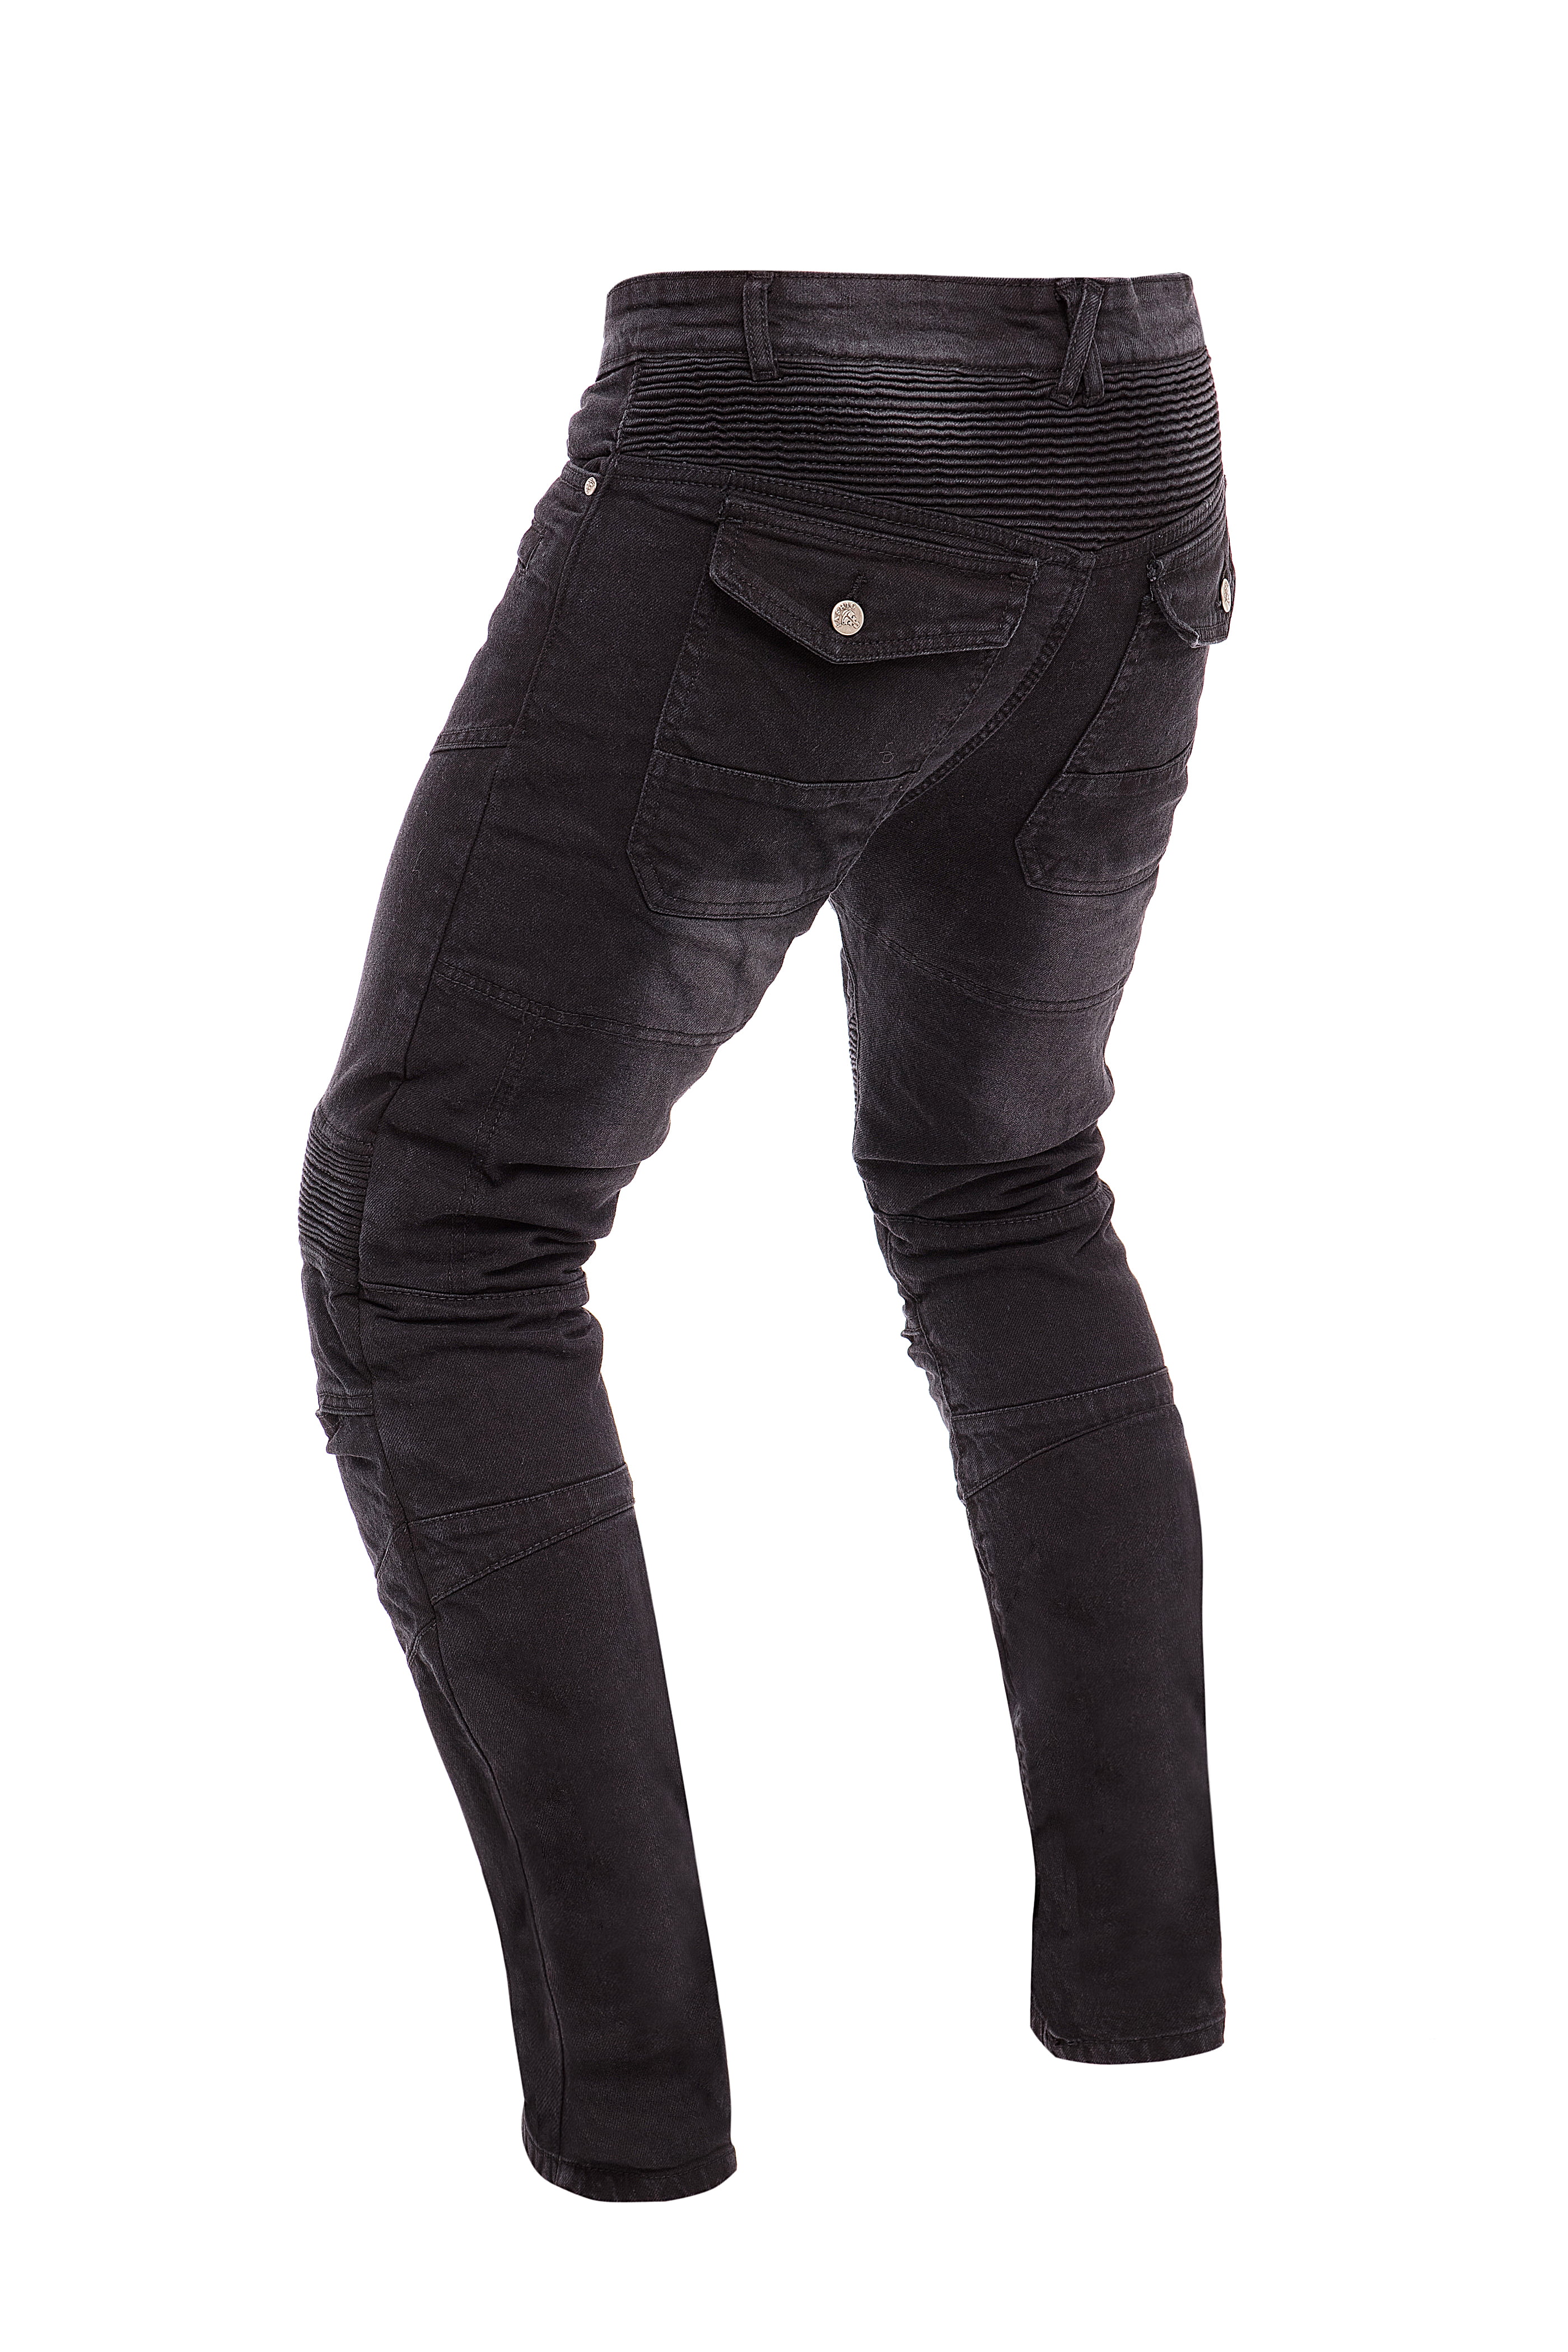 Women Motorcycle Riding Pant Reinforce Biker Jeans with Aramid Protection Lining 